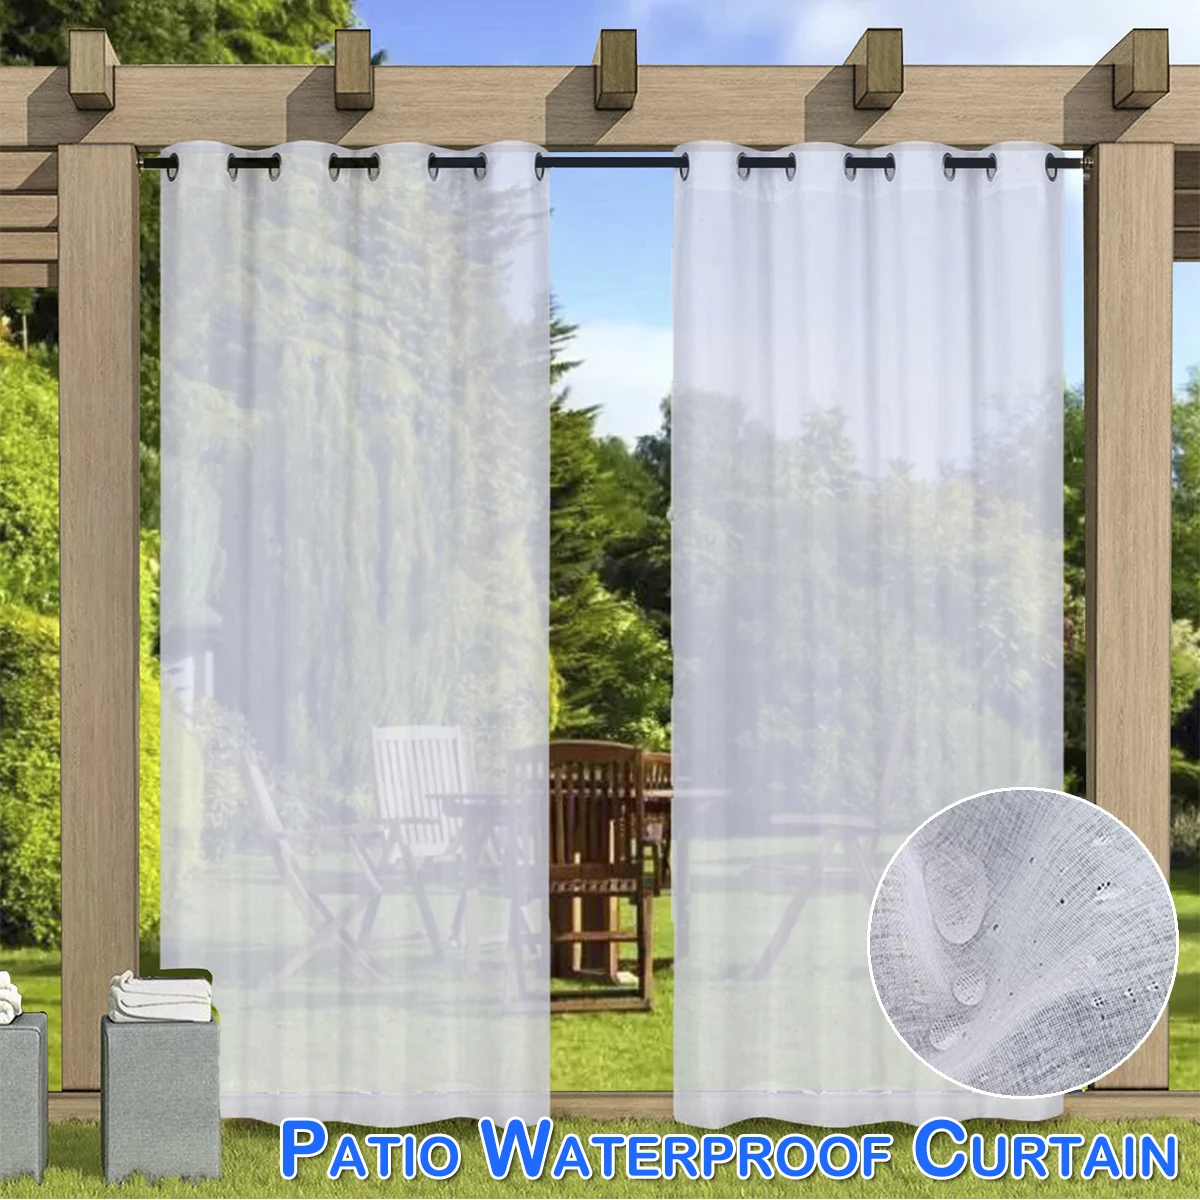 Waterproof Curtain for Patio Voile Sheer Outdoor Porch Yard Breathable Divider 